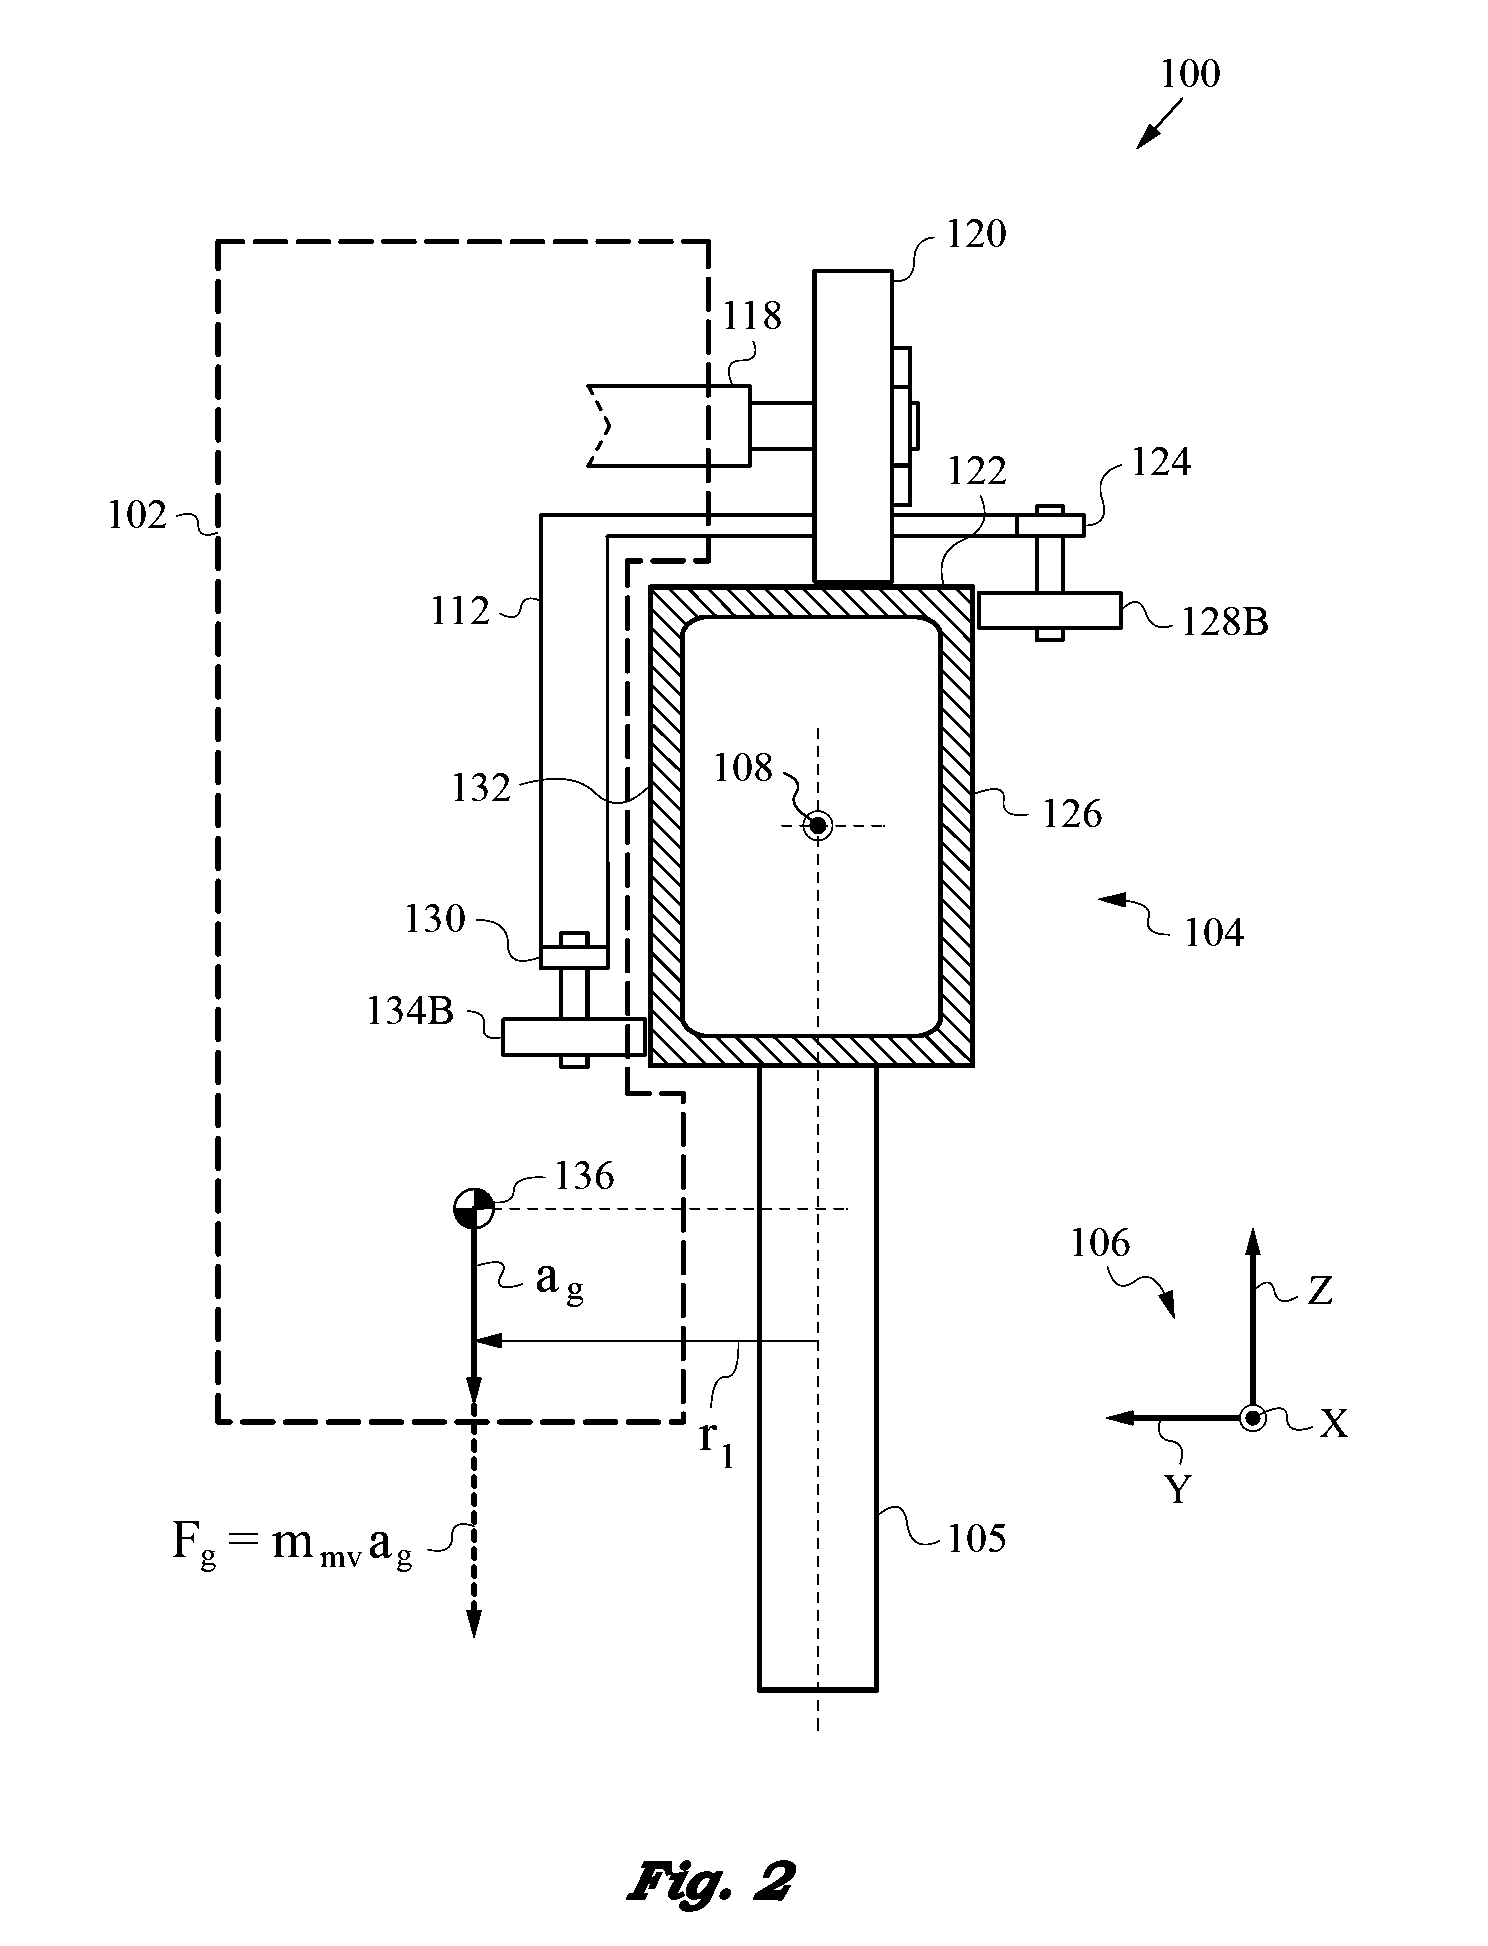 Monorail vehicle apparatus with gravity-controlled roll attitude and loading